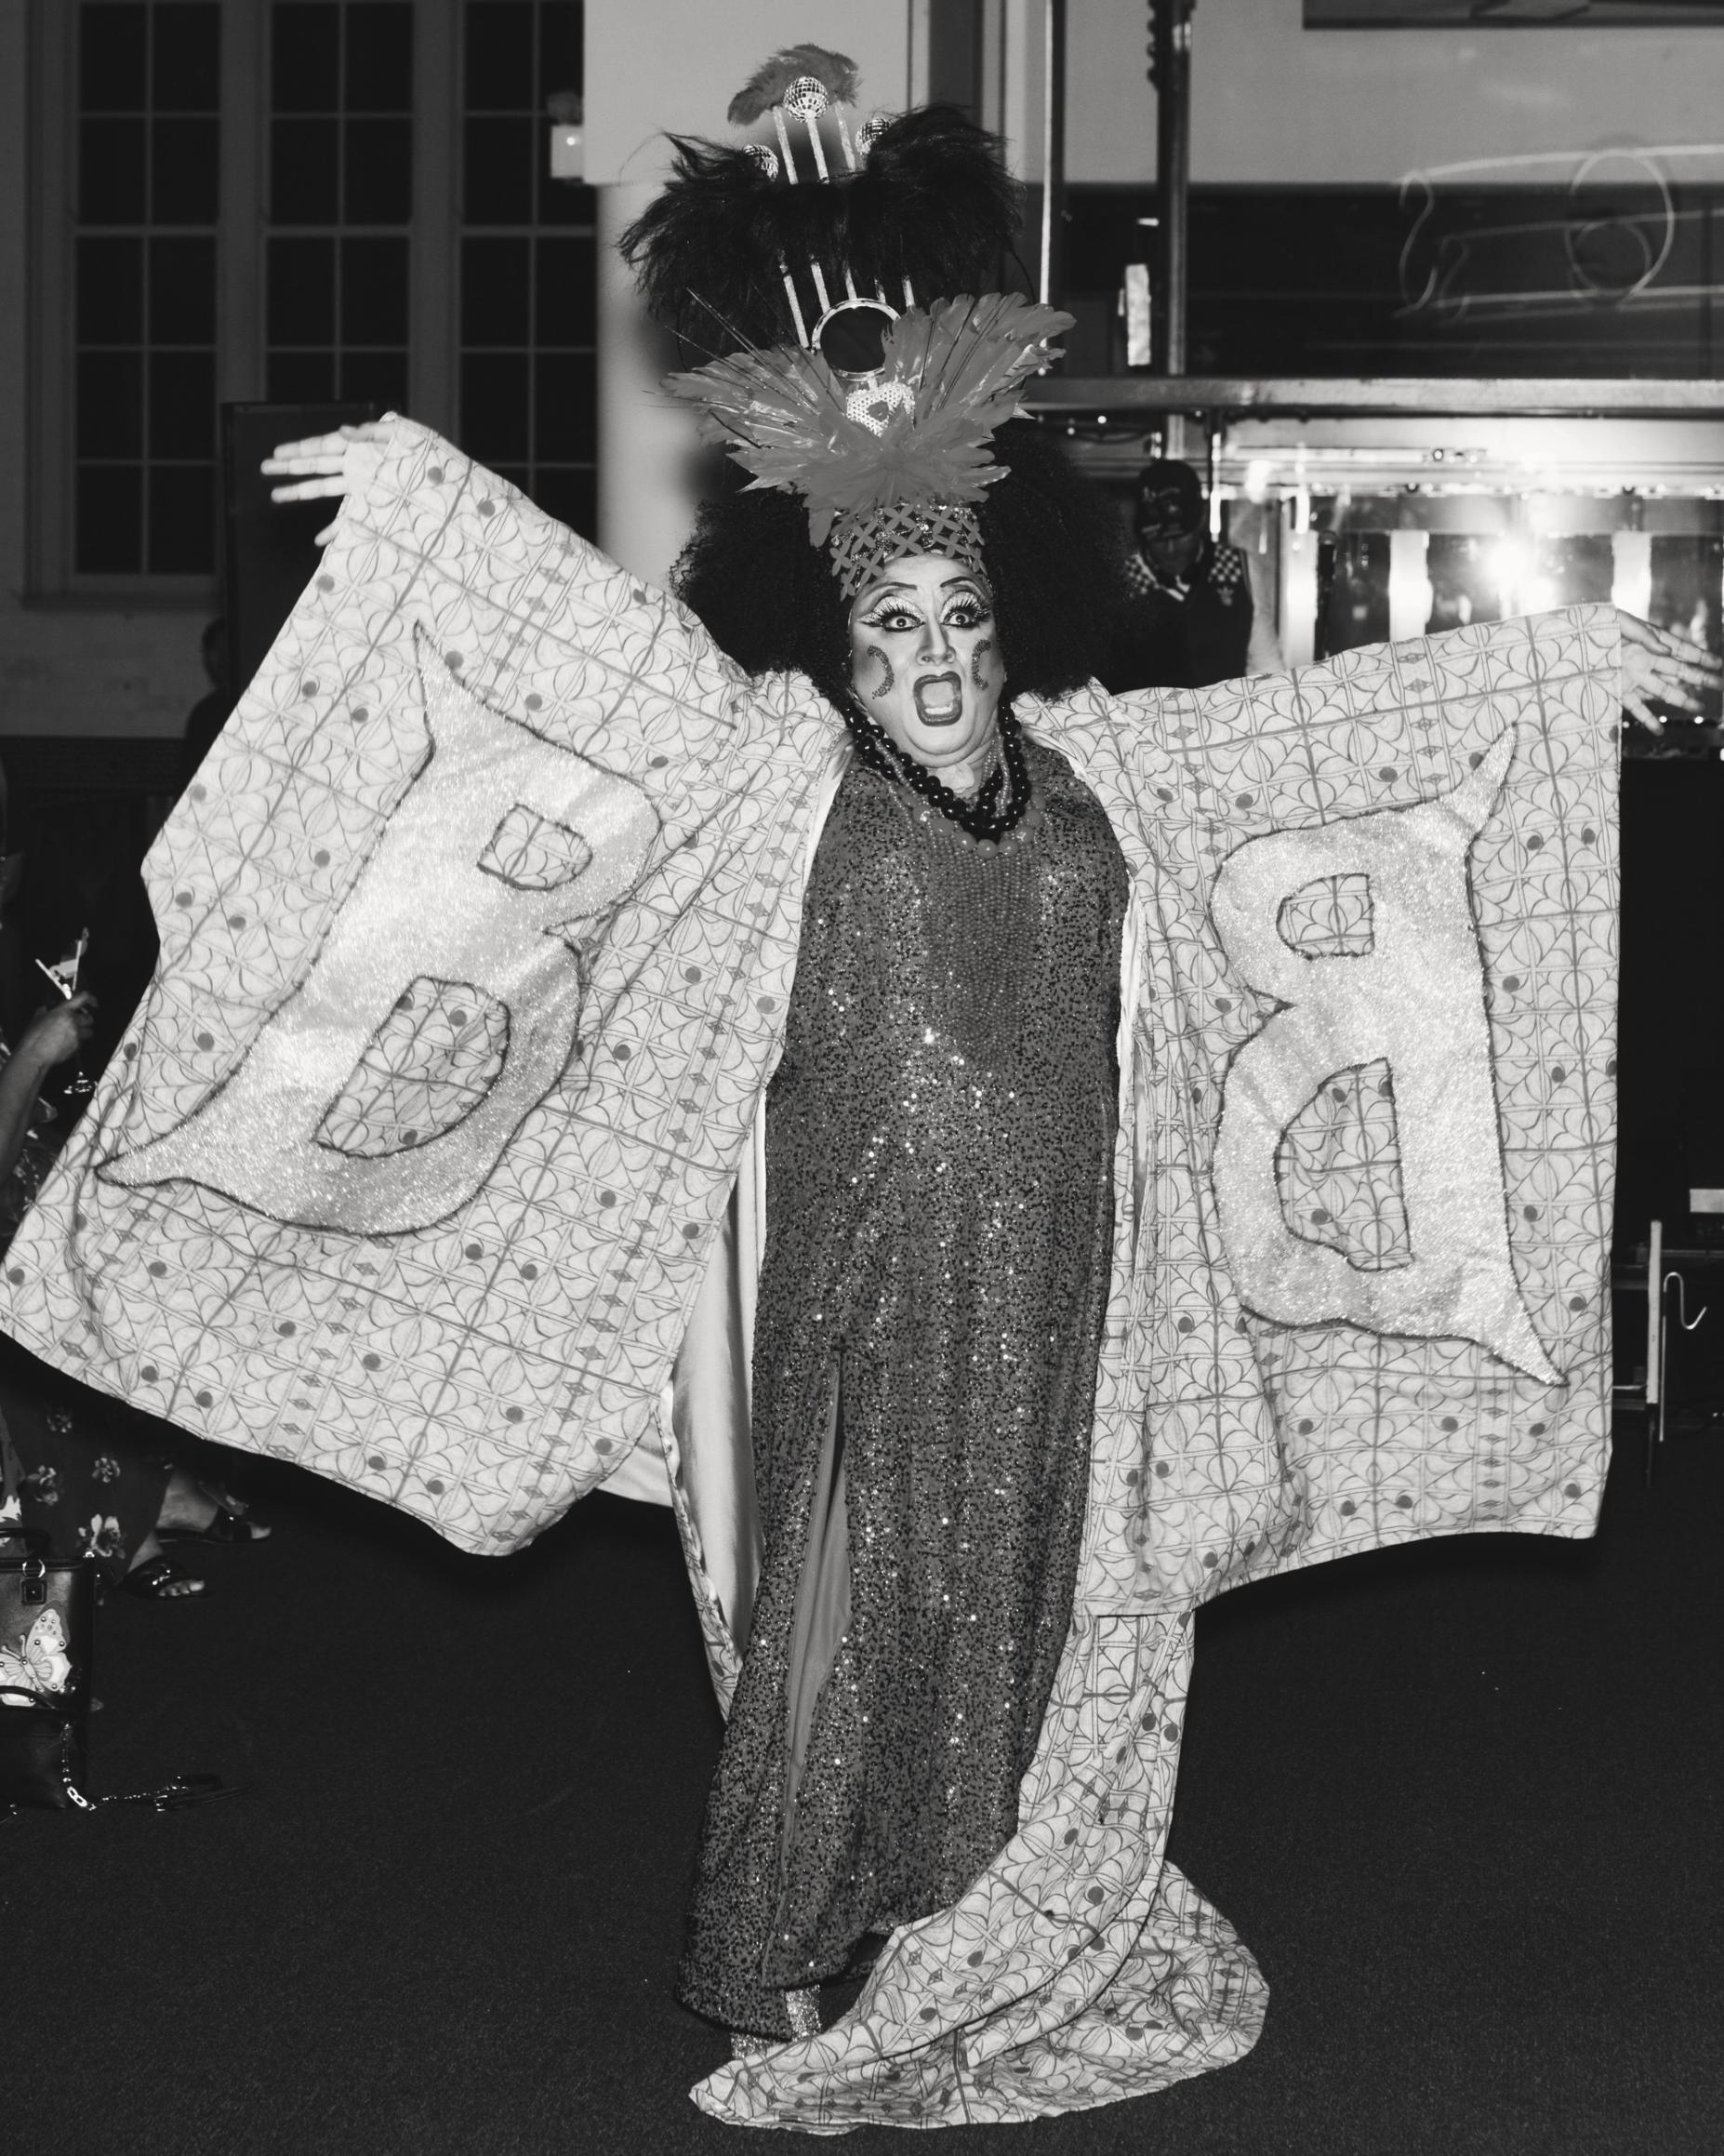 A drag performer performing in a kimono embroidered with large text reading ‘B'